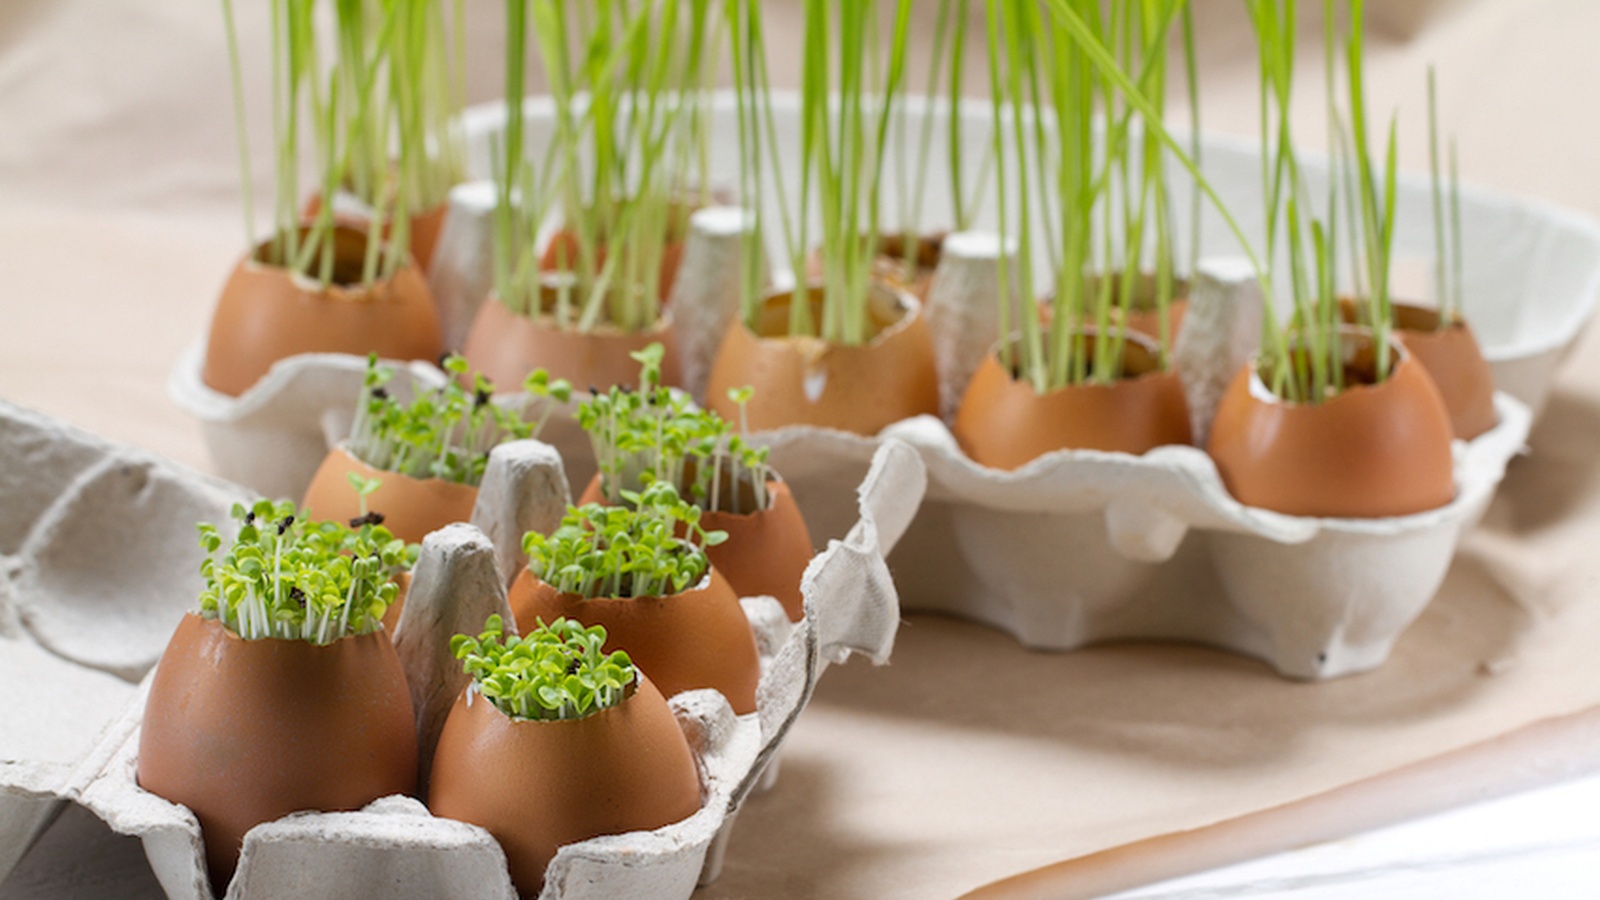 How To Grow Your Own Herbs On Your Kitchen Counter